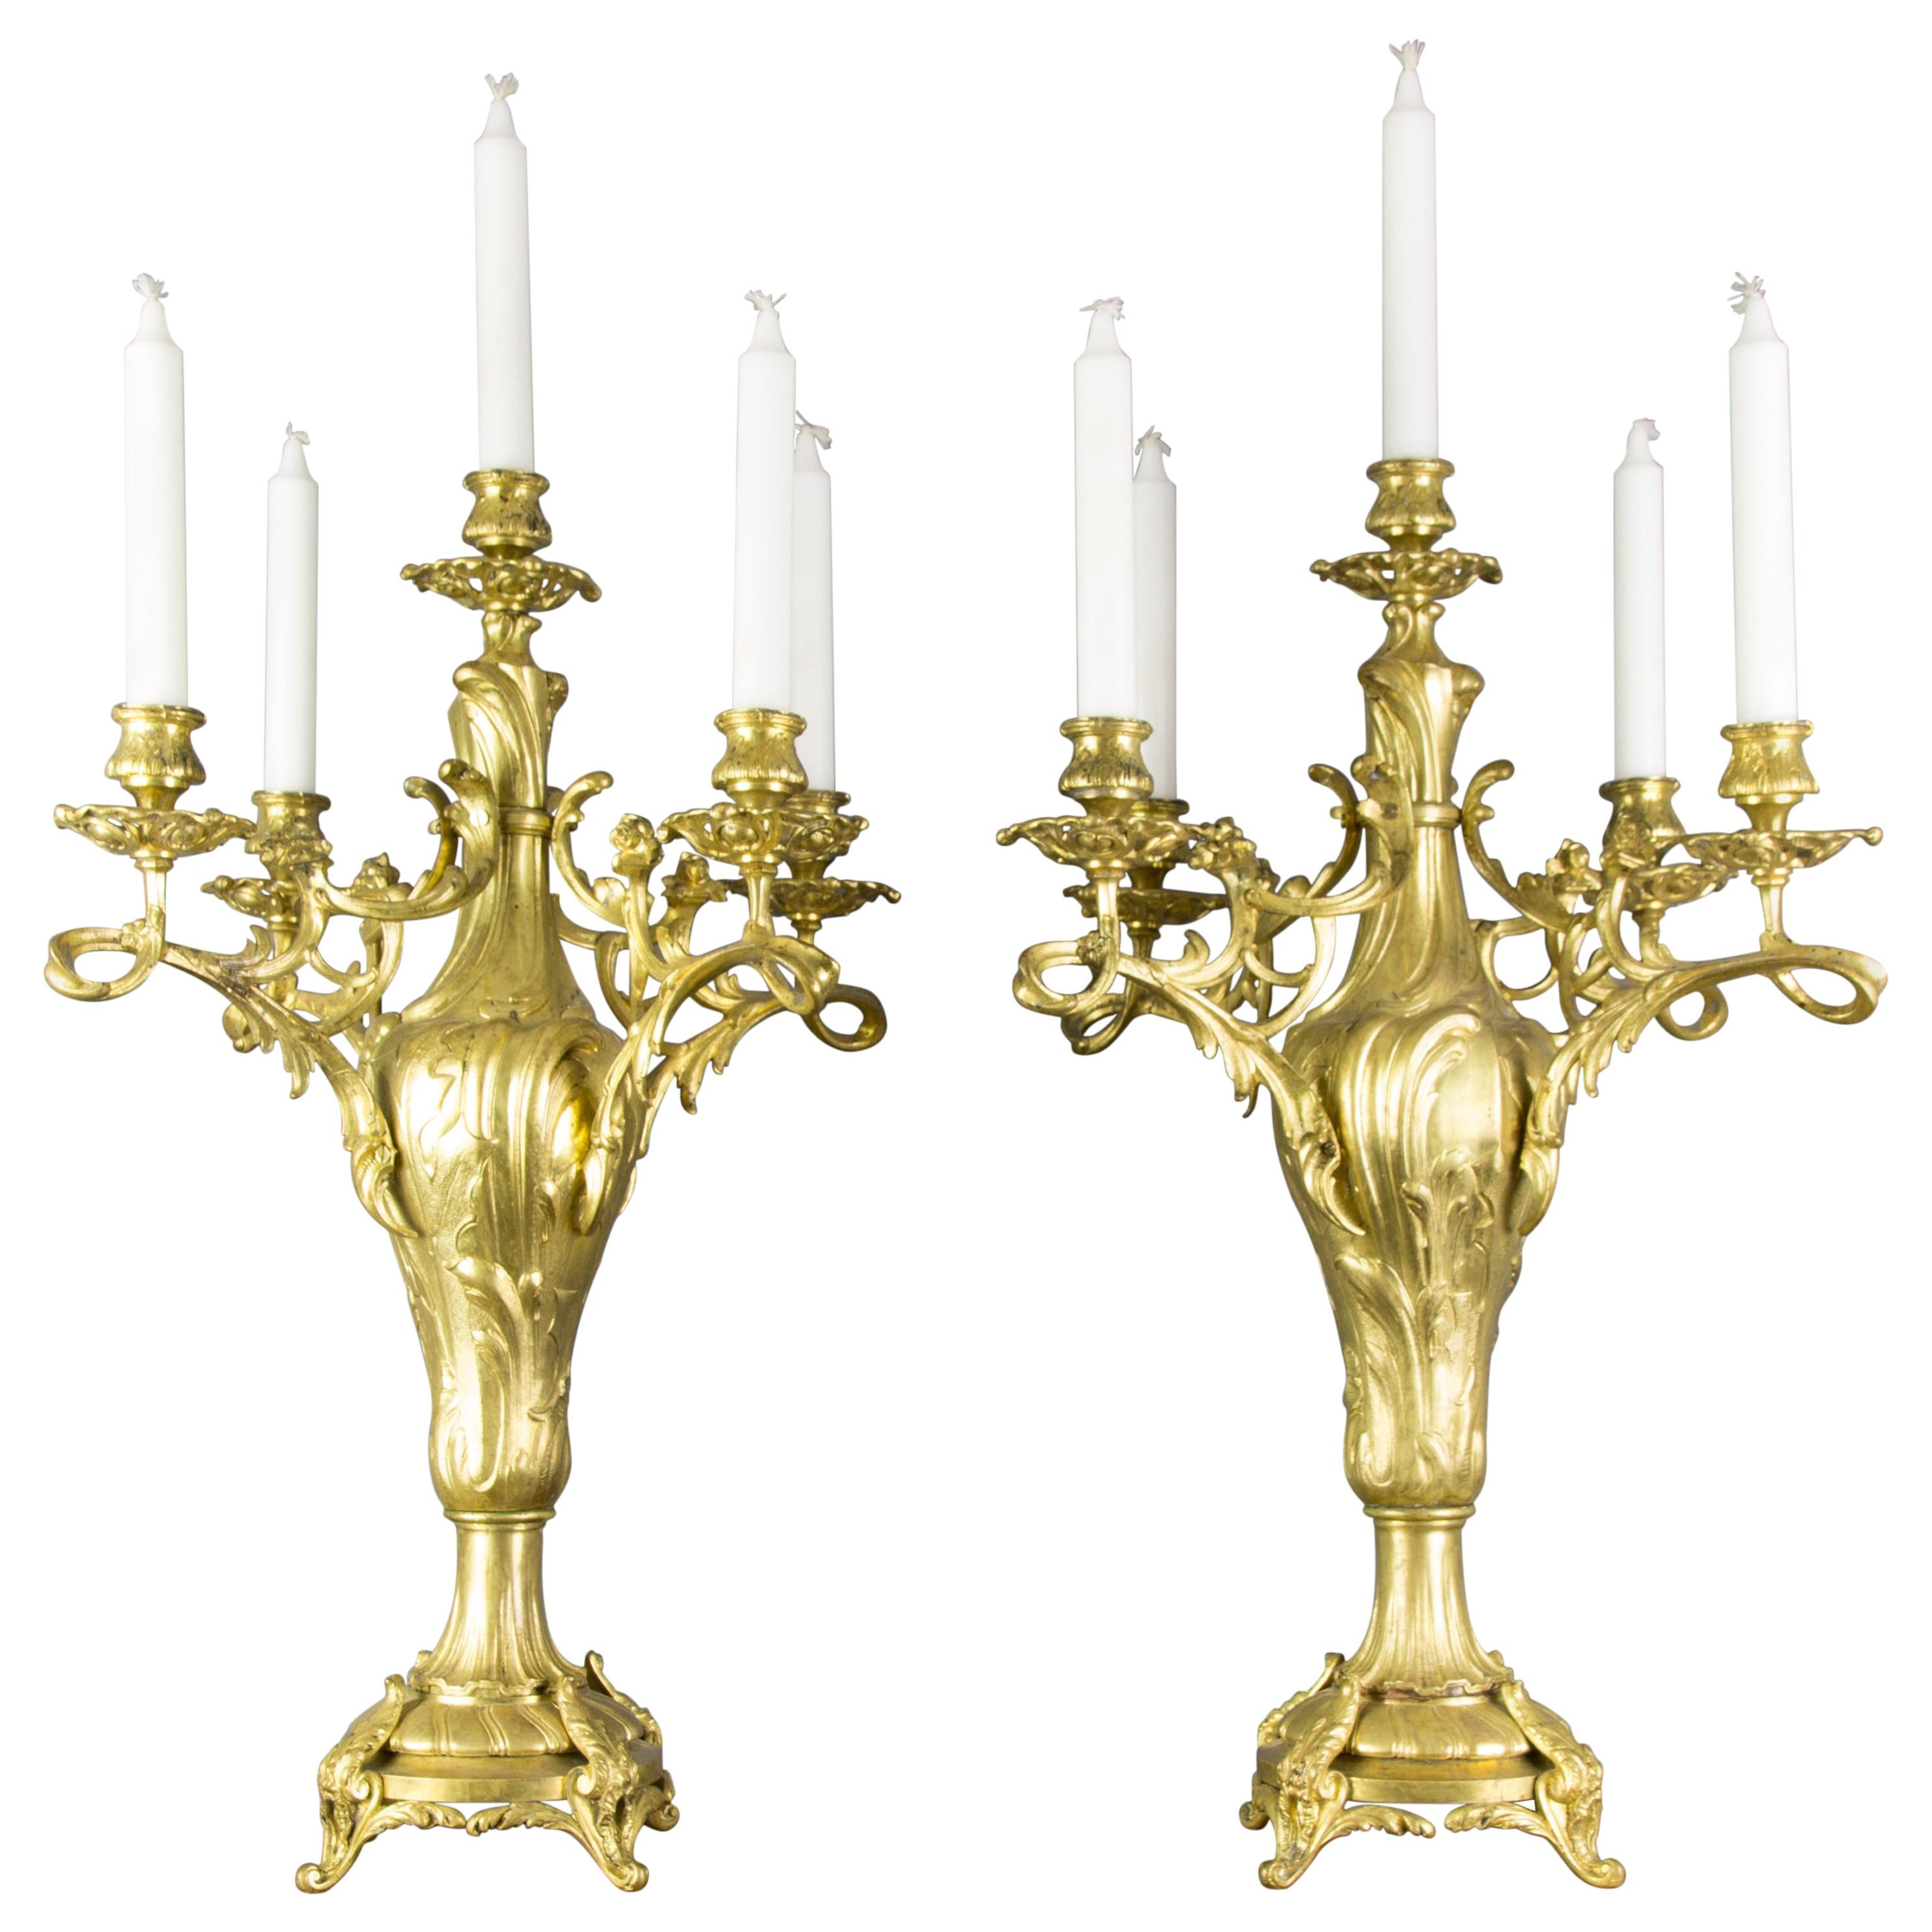 Pair of Large French Louis XV Style Bronze Five-Light Candelabras